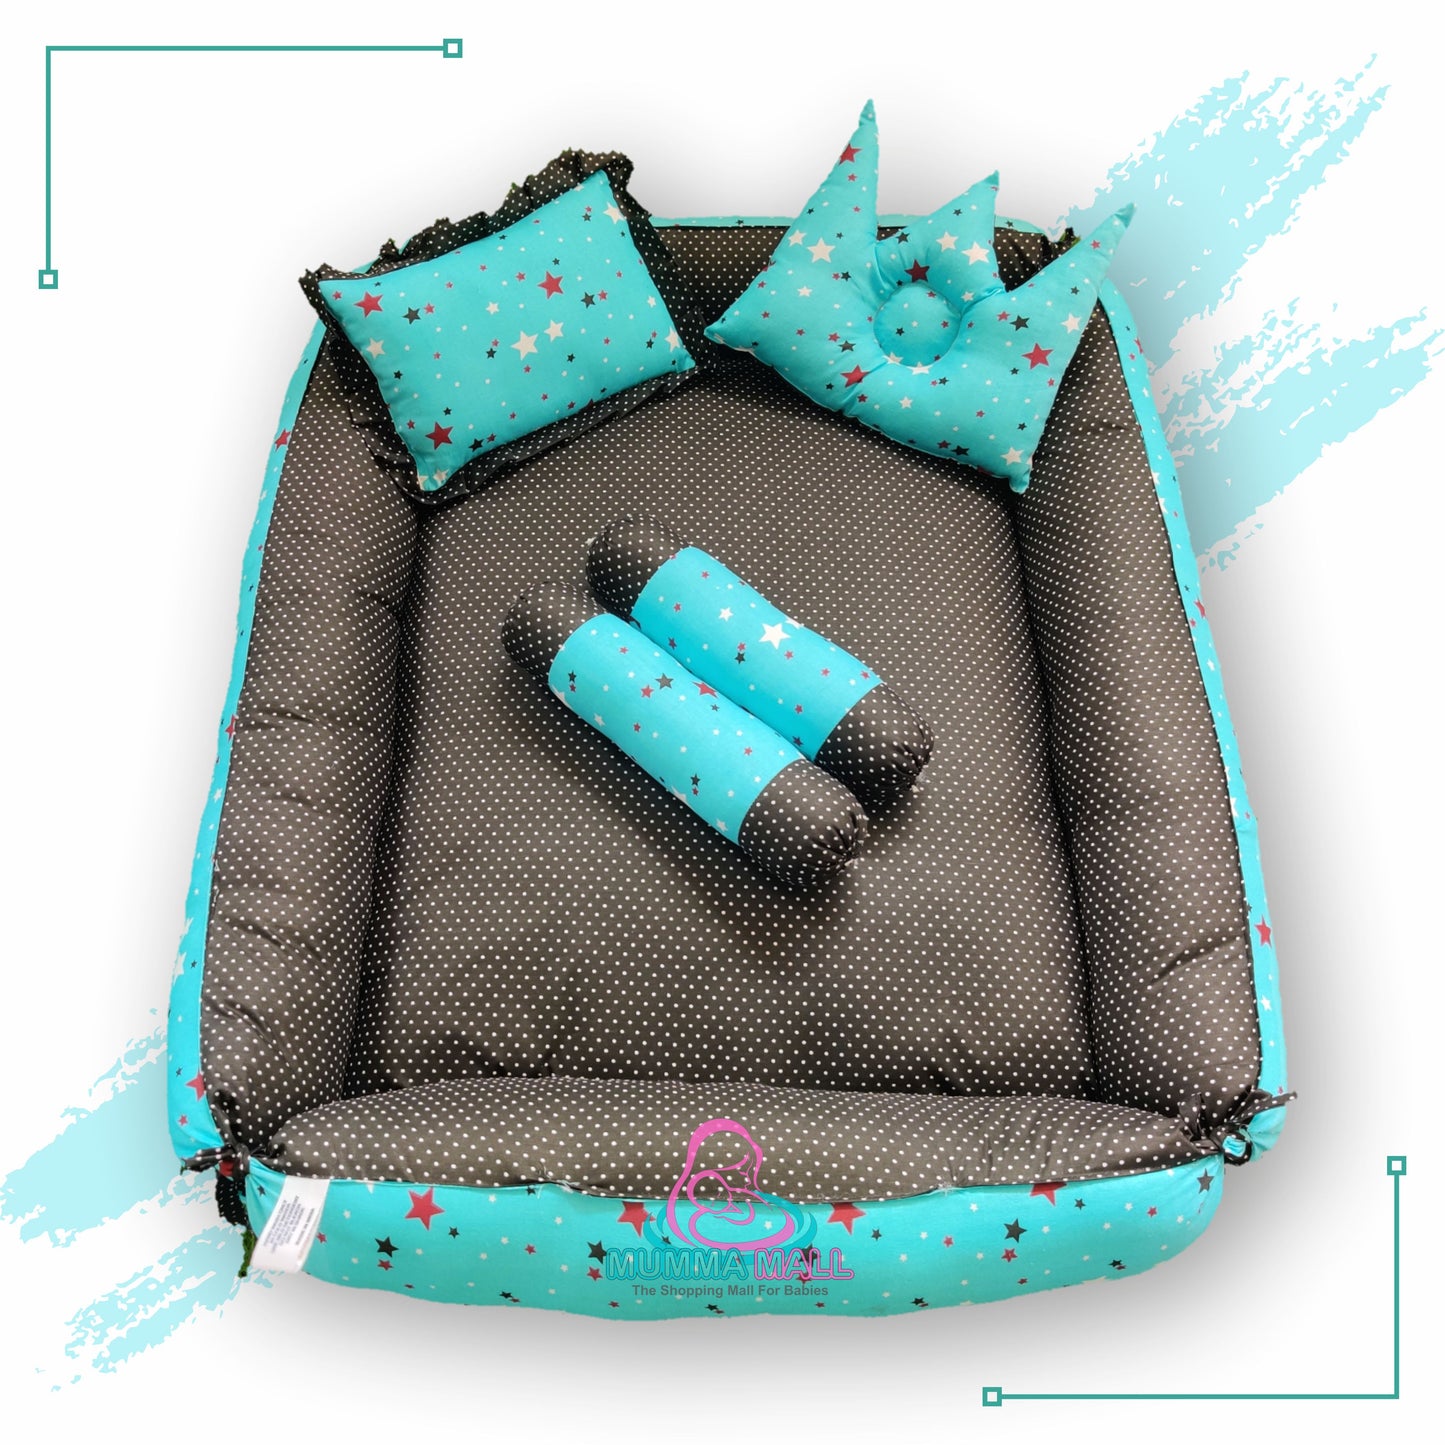 Baby box mattress set with set of 4 pillows as neck support, side support and toy (Turquoise and Black)